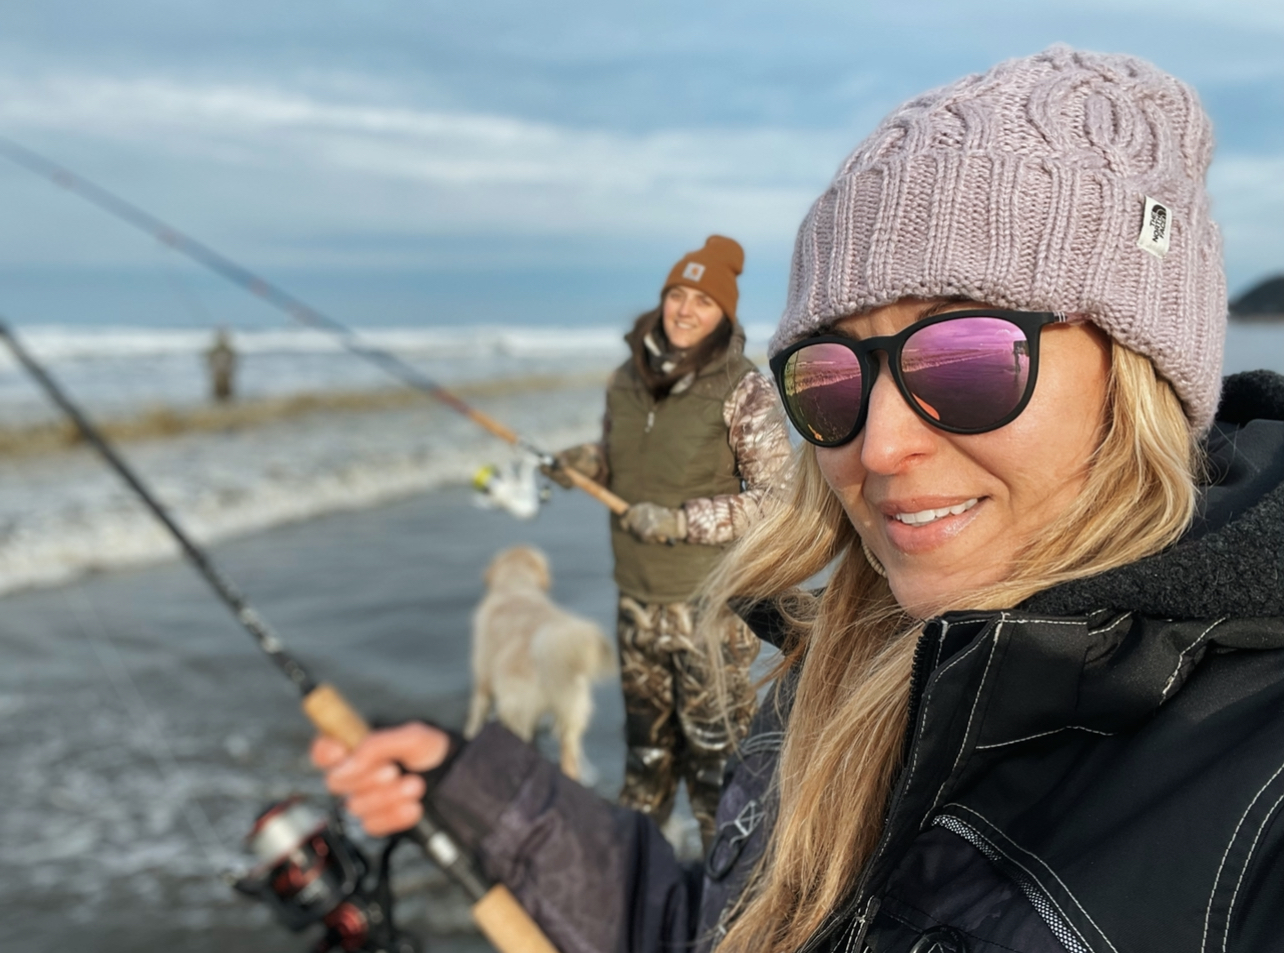 Surf Fishing the Coast of Grays Harbor County, a Beginners Approach -  ThurstonTalk